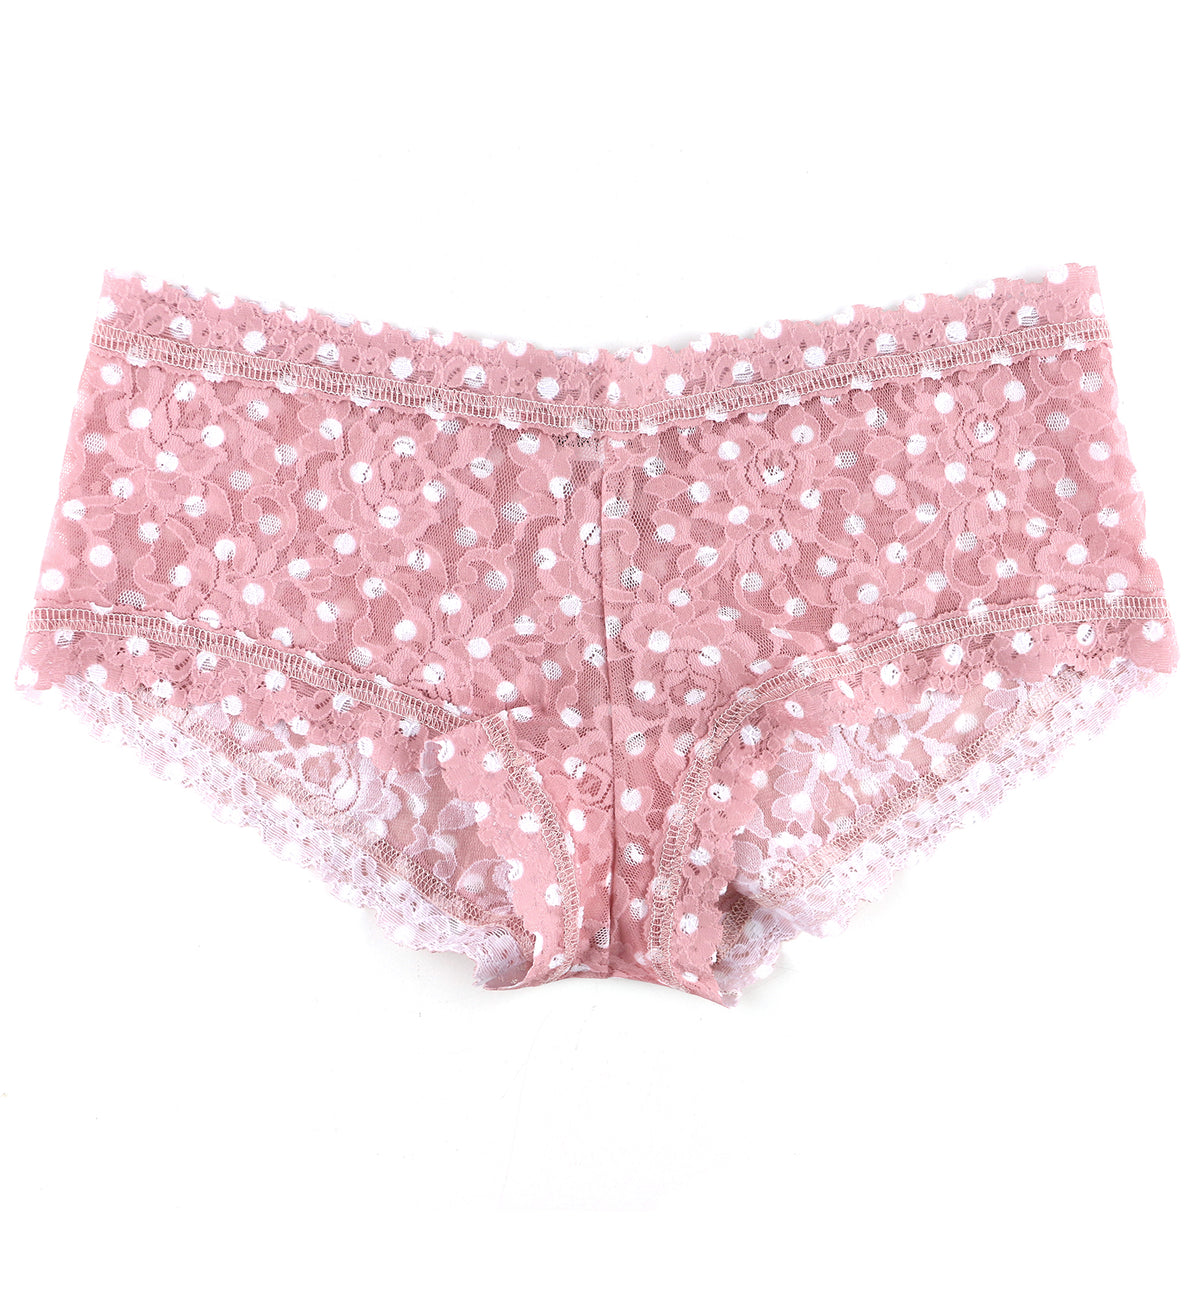 Hanky Panky Signature Lace Printed Boyshort (PR4812P),XS,Pink Frosting - Pink Frosting,XS